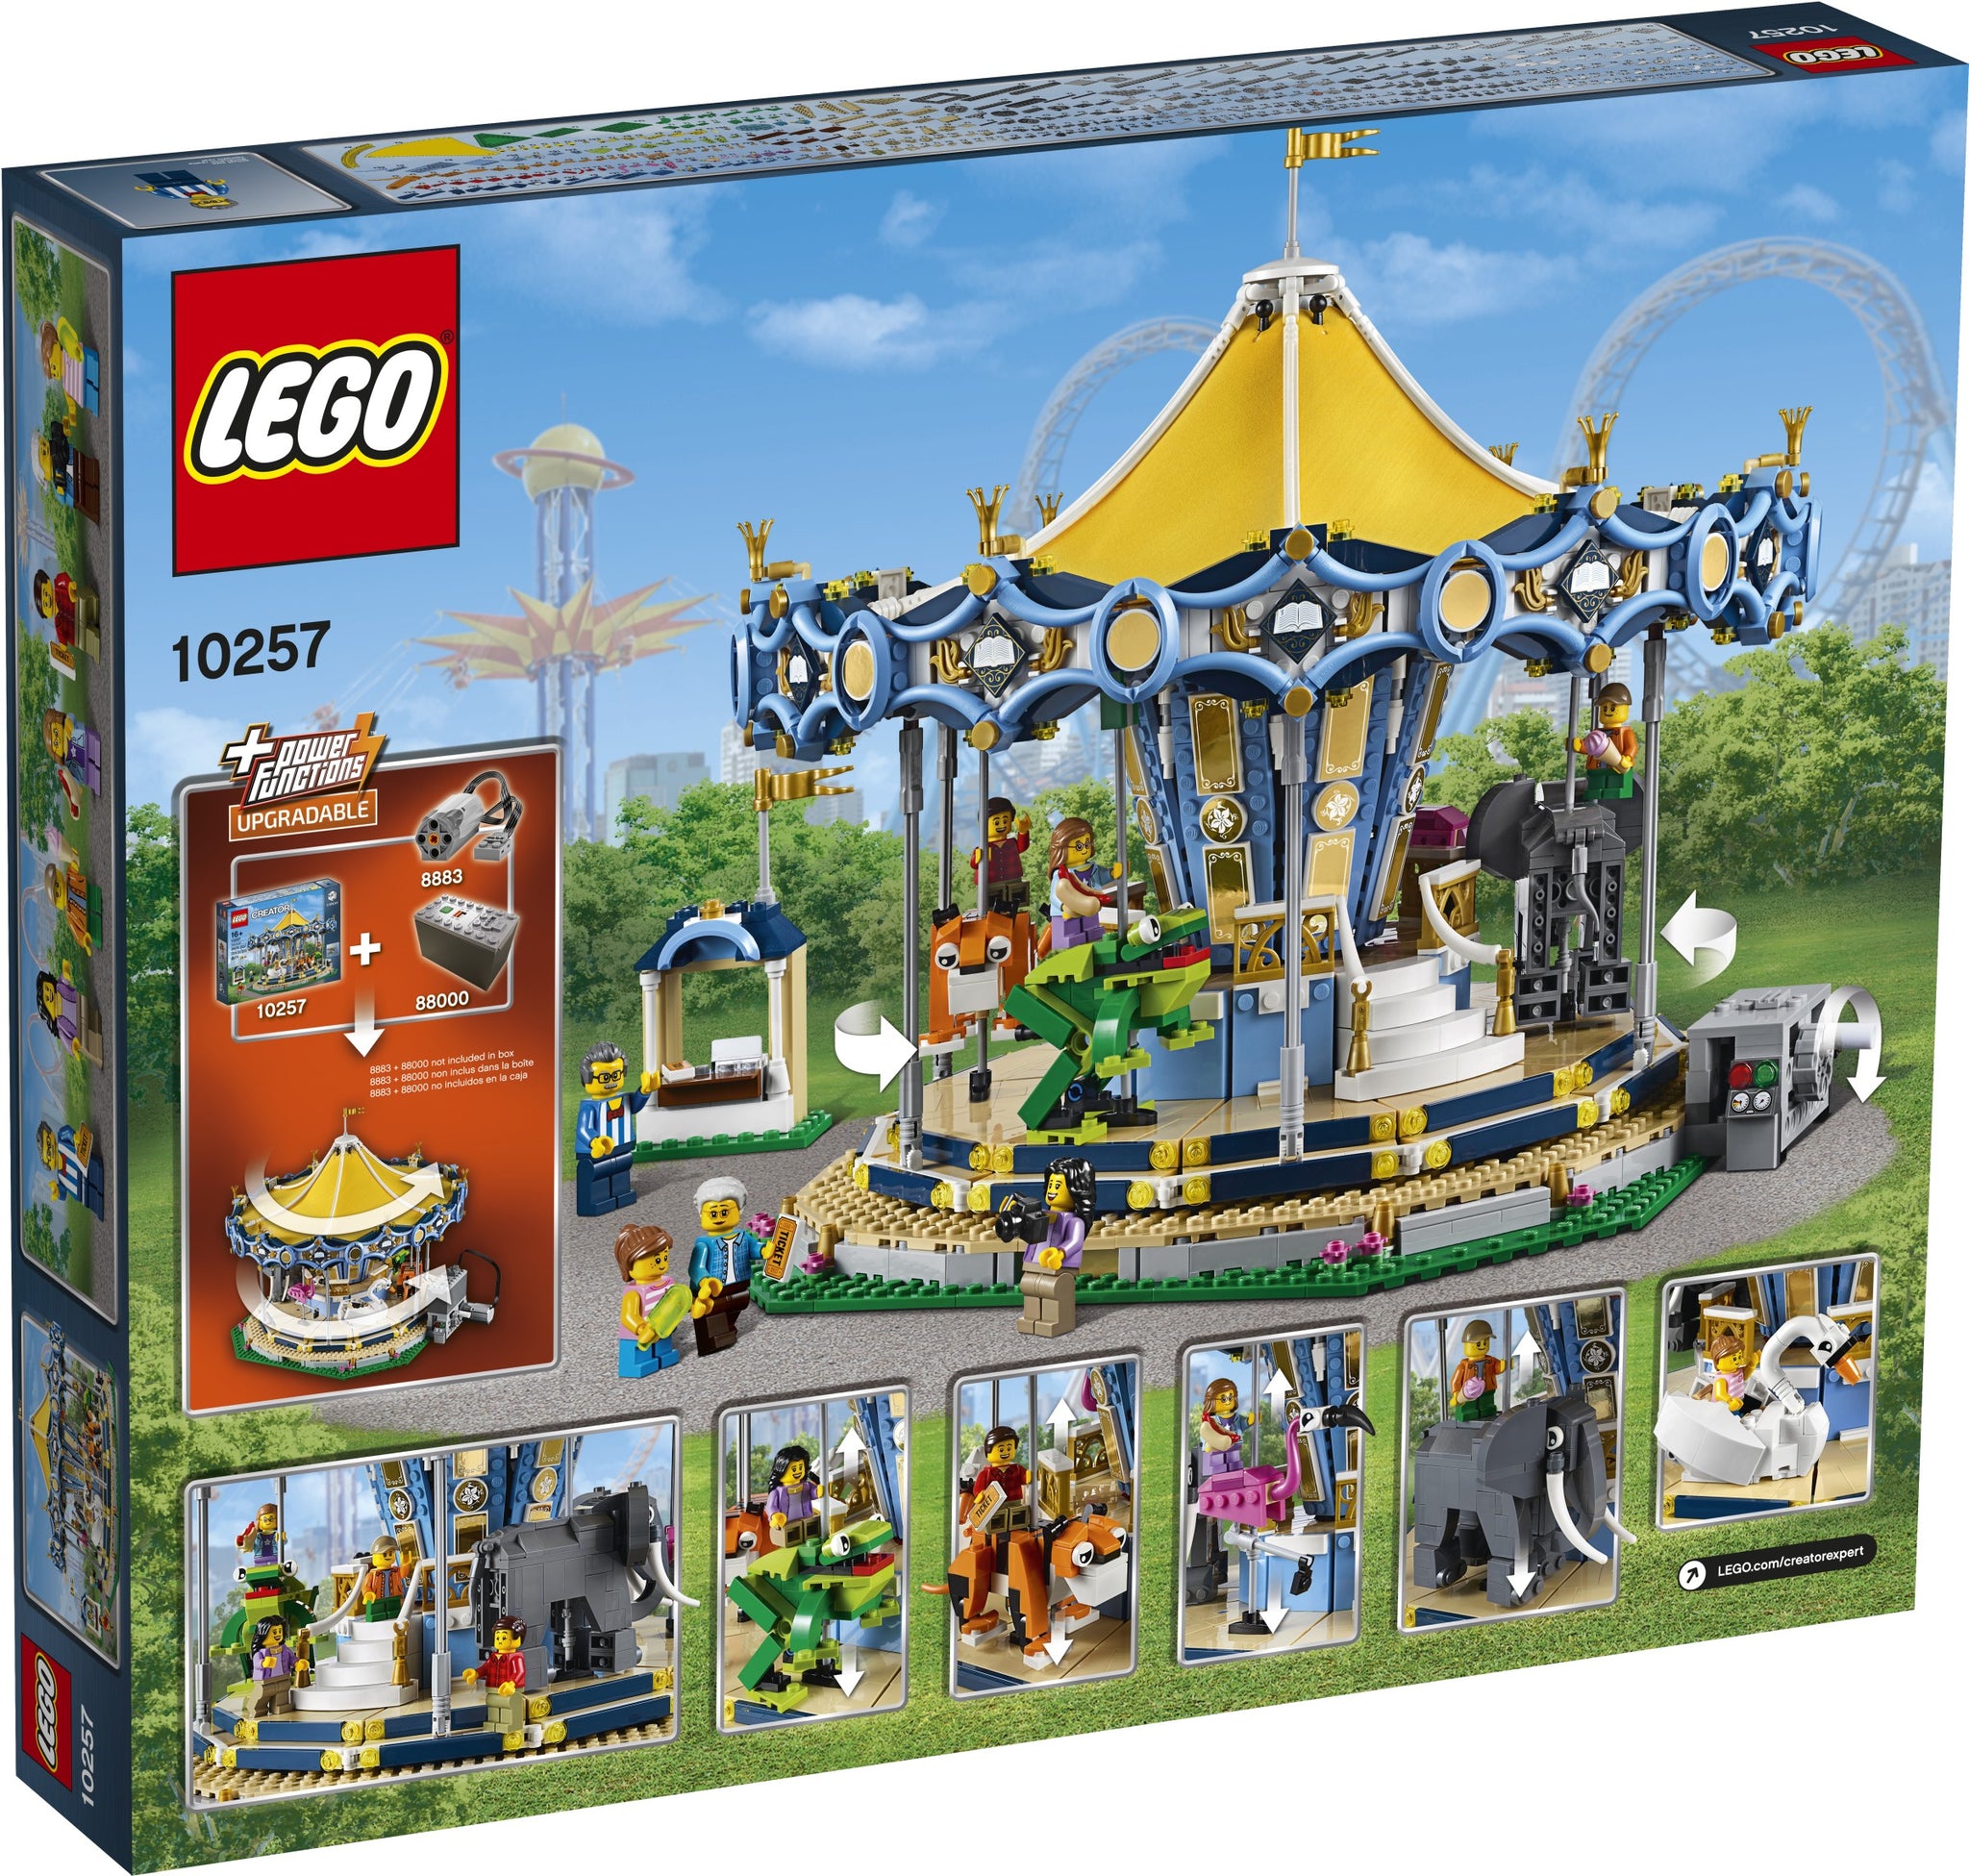 I forhold is elegant LEGO® Creator Expert 10257 Carousel (2670 pieces) – AESOP'S FABLE